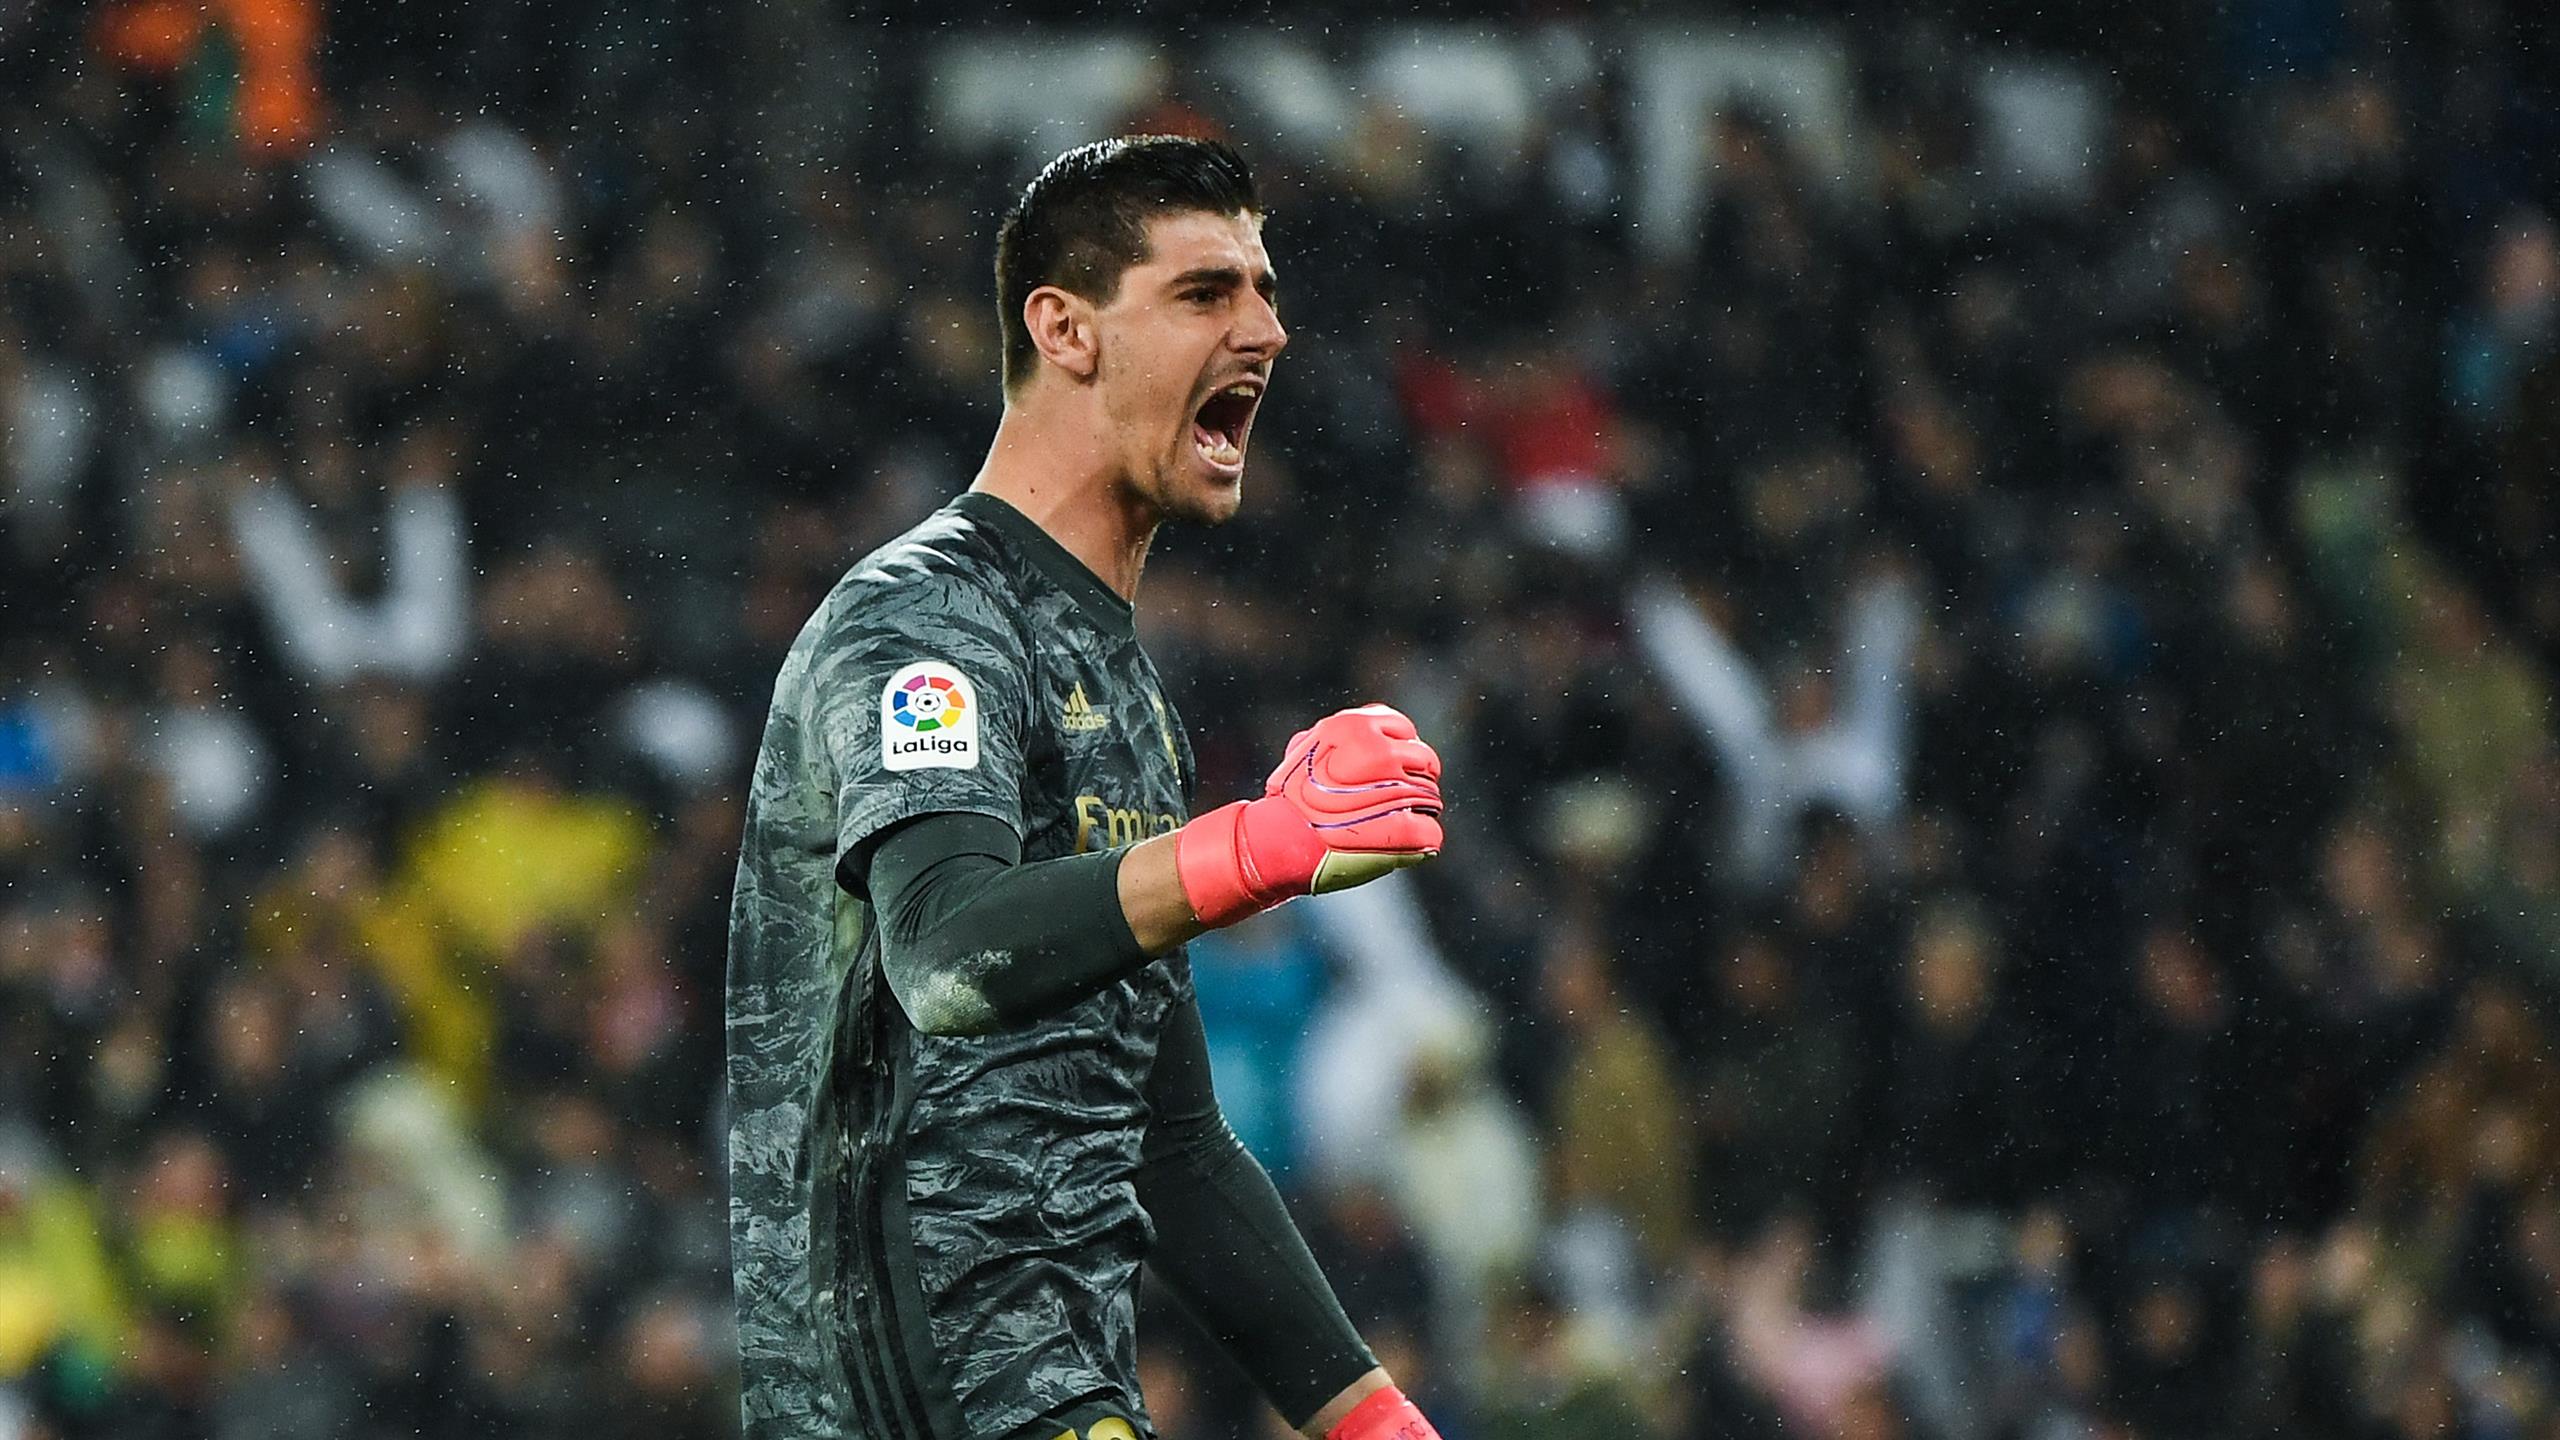 Thibaut Courtois: From court jester to Bernabeu king